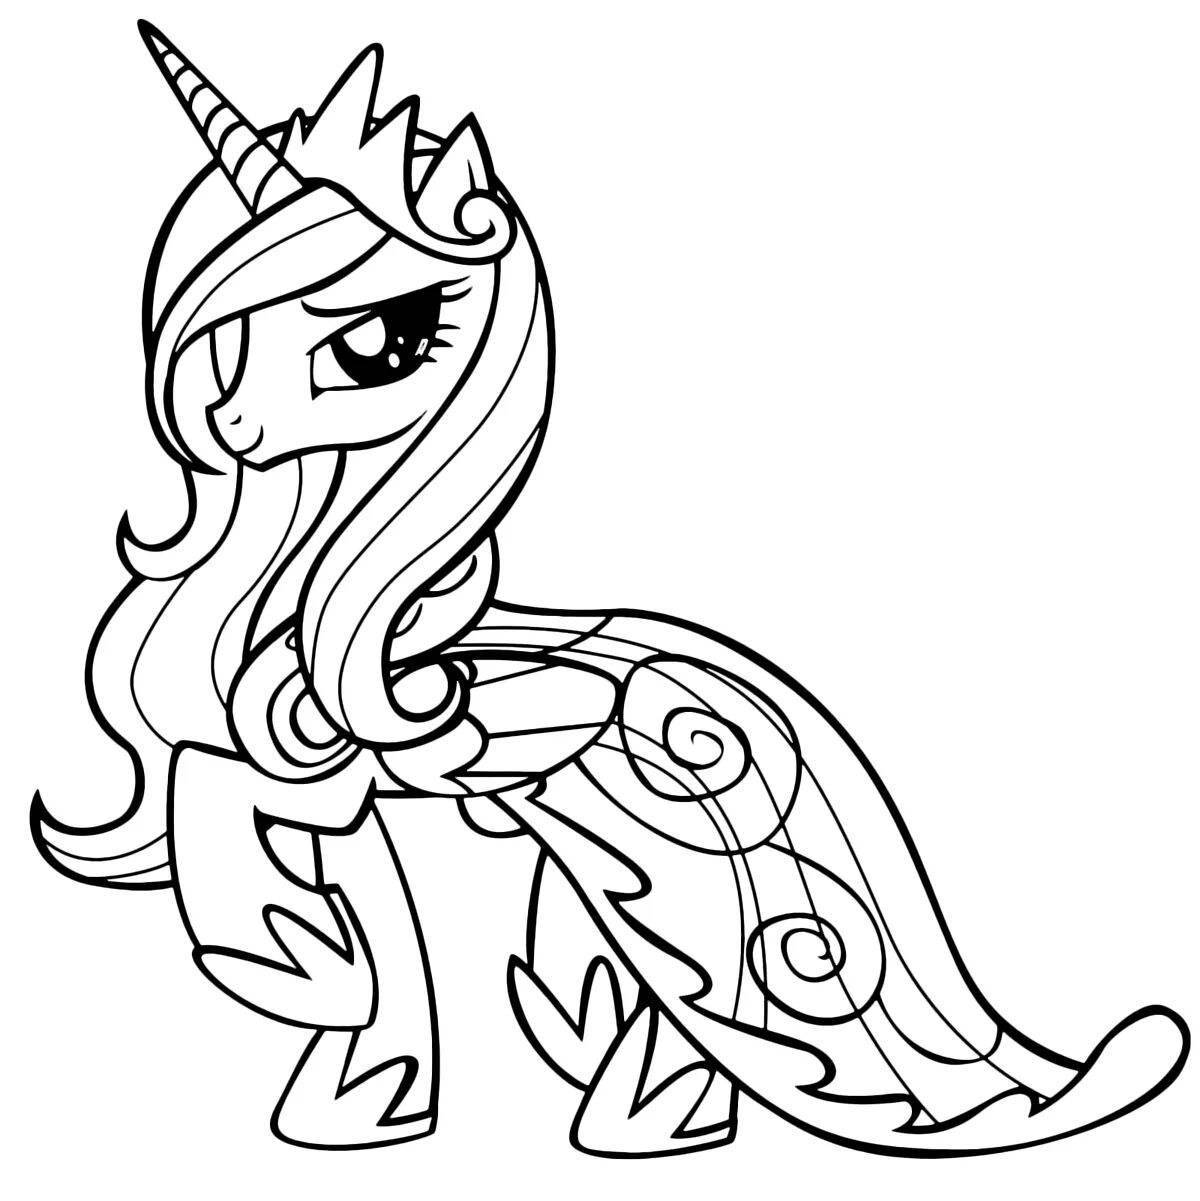 Colorful cadence pony coloring page